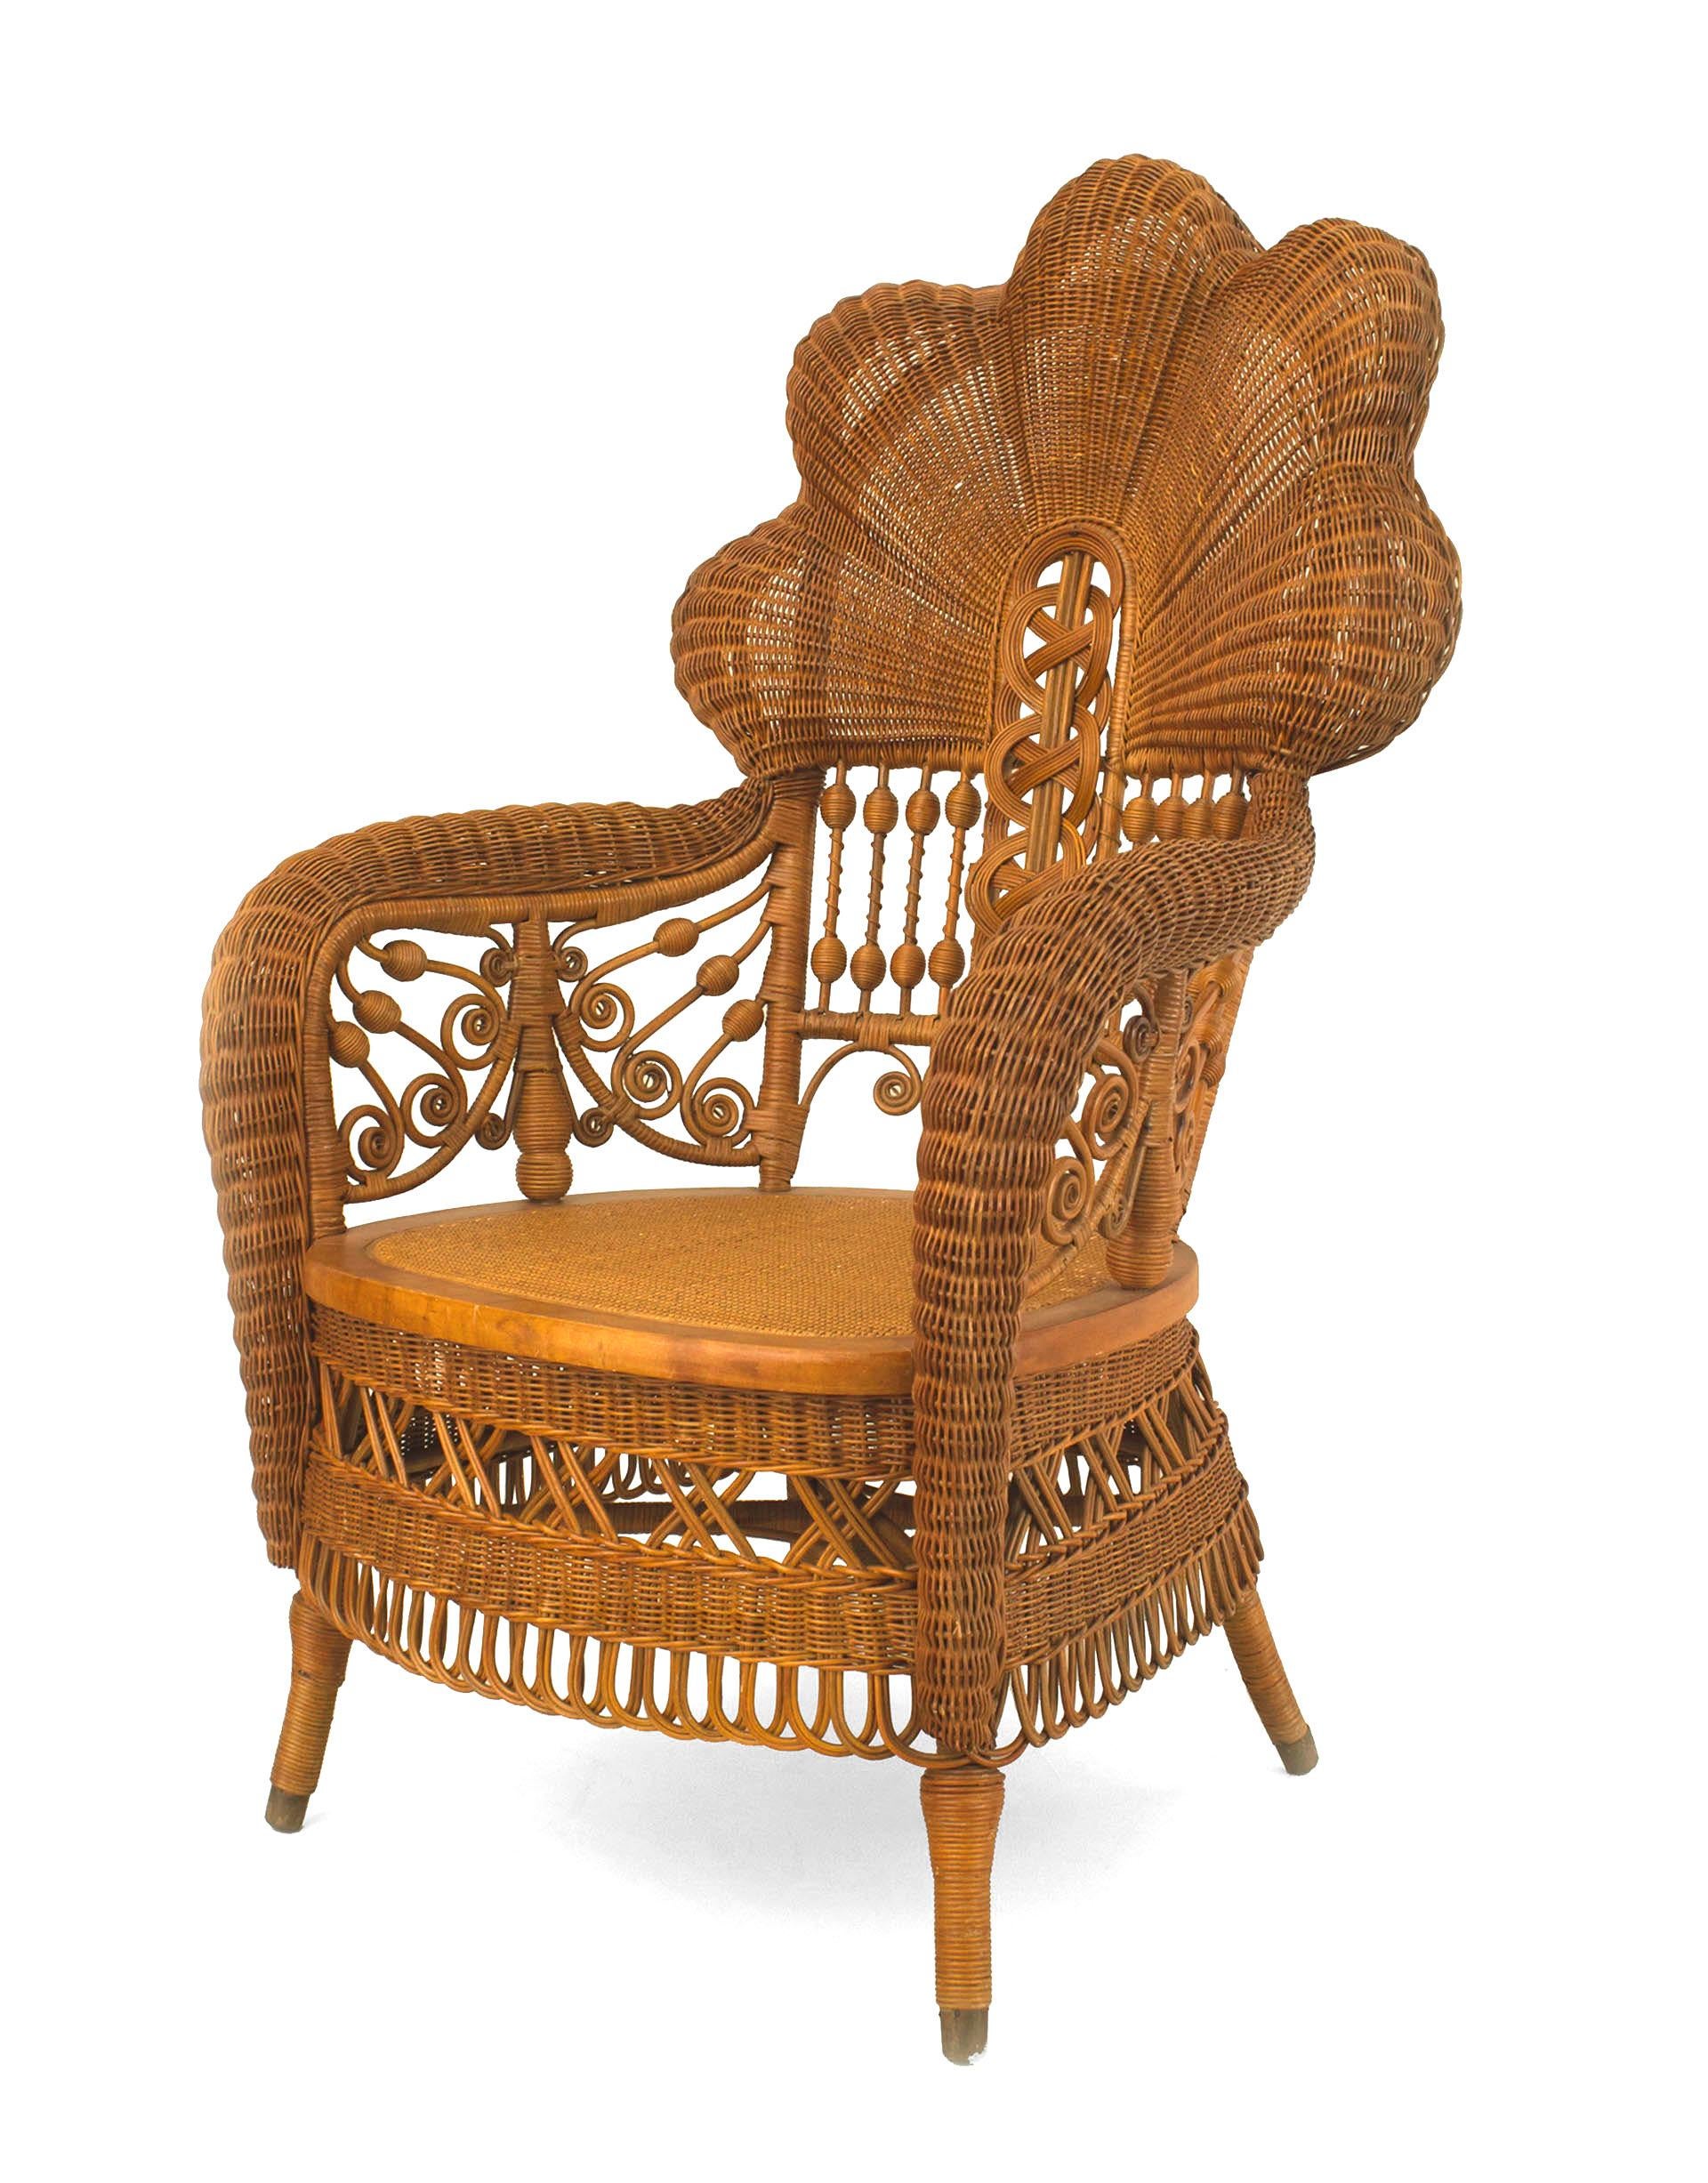 American Victorian natural wicker arm chair with fan shaped back with scroll and filigree design. (Heywood Brothers)
